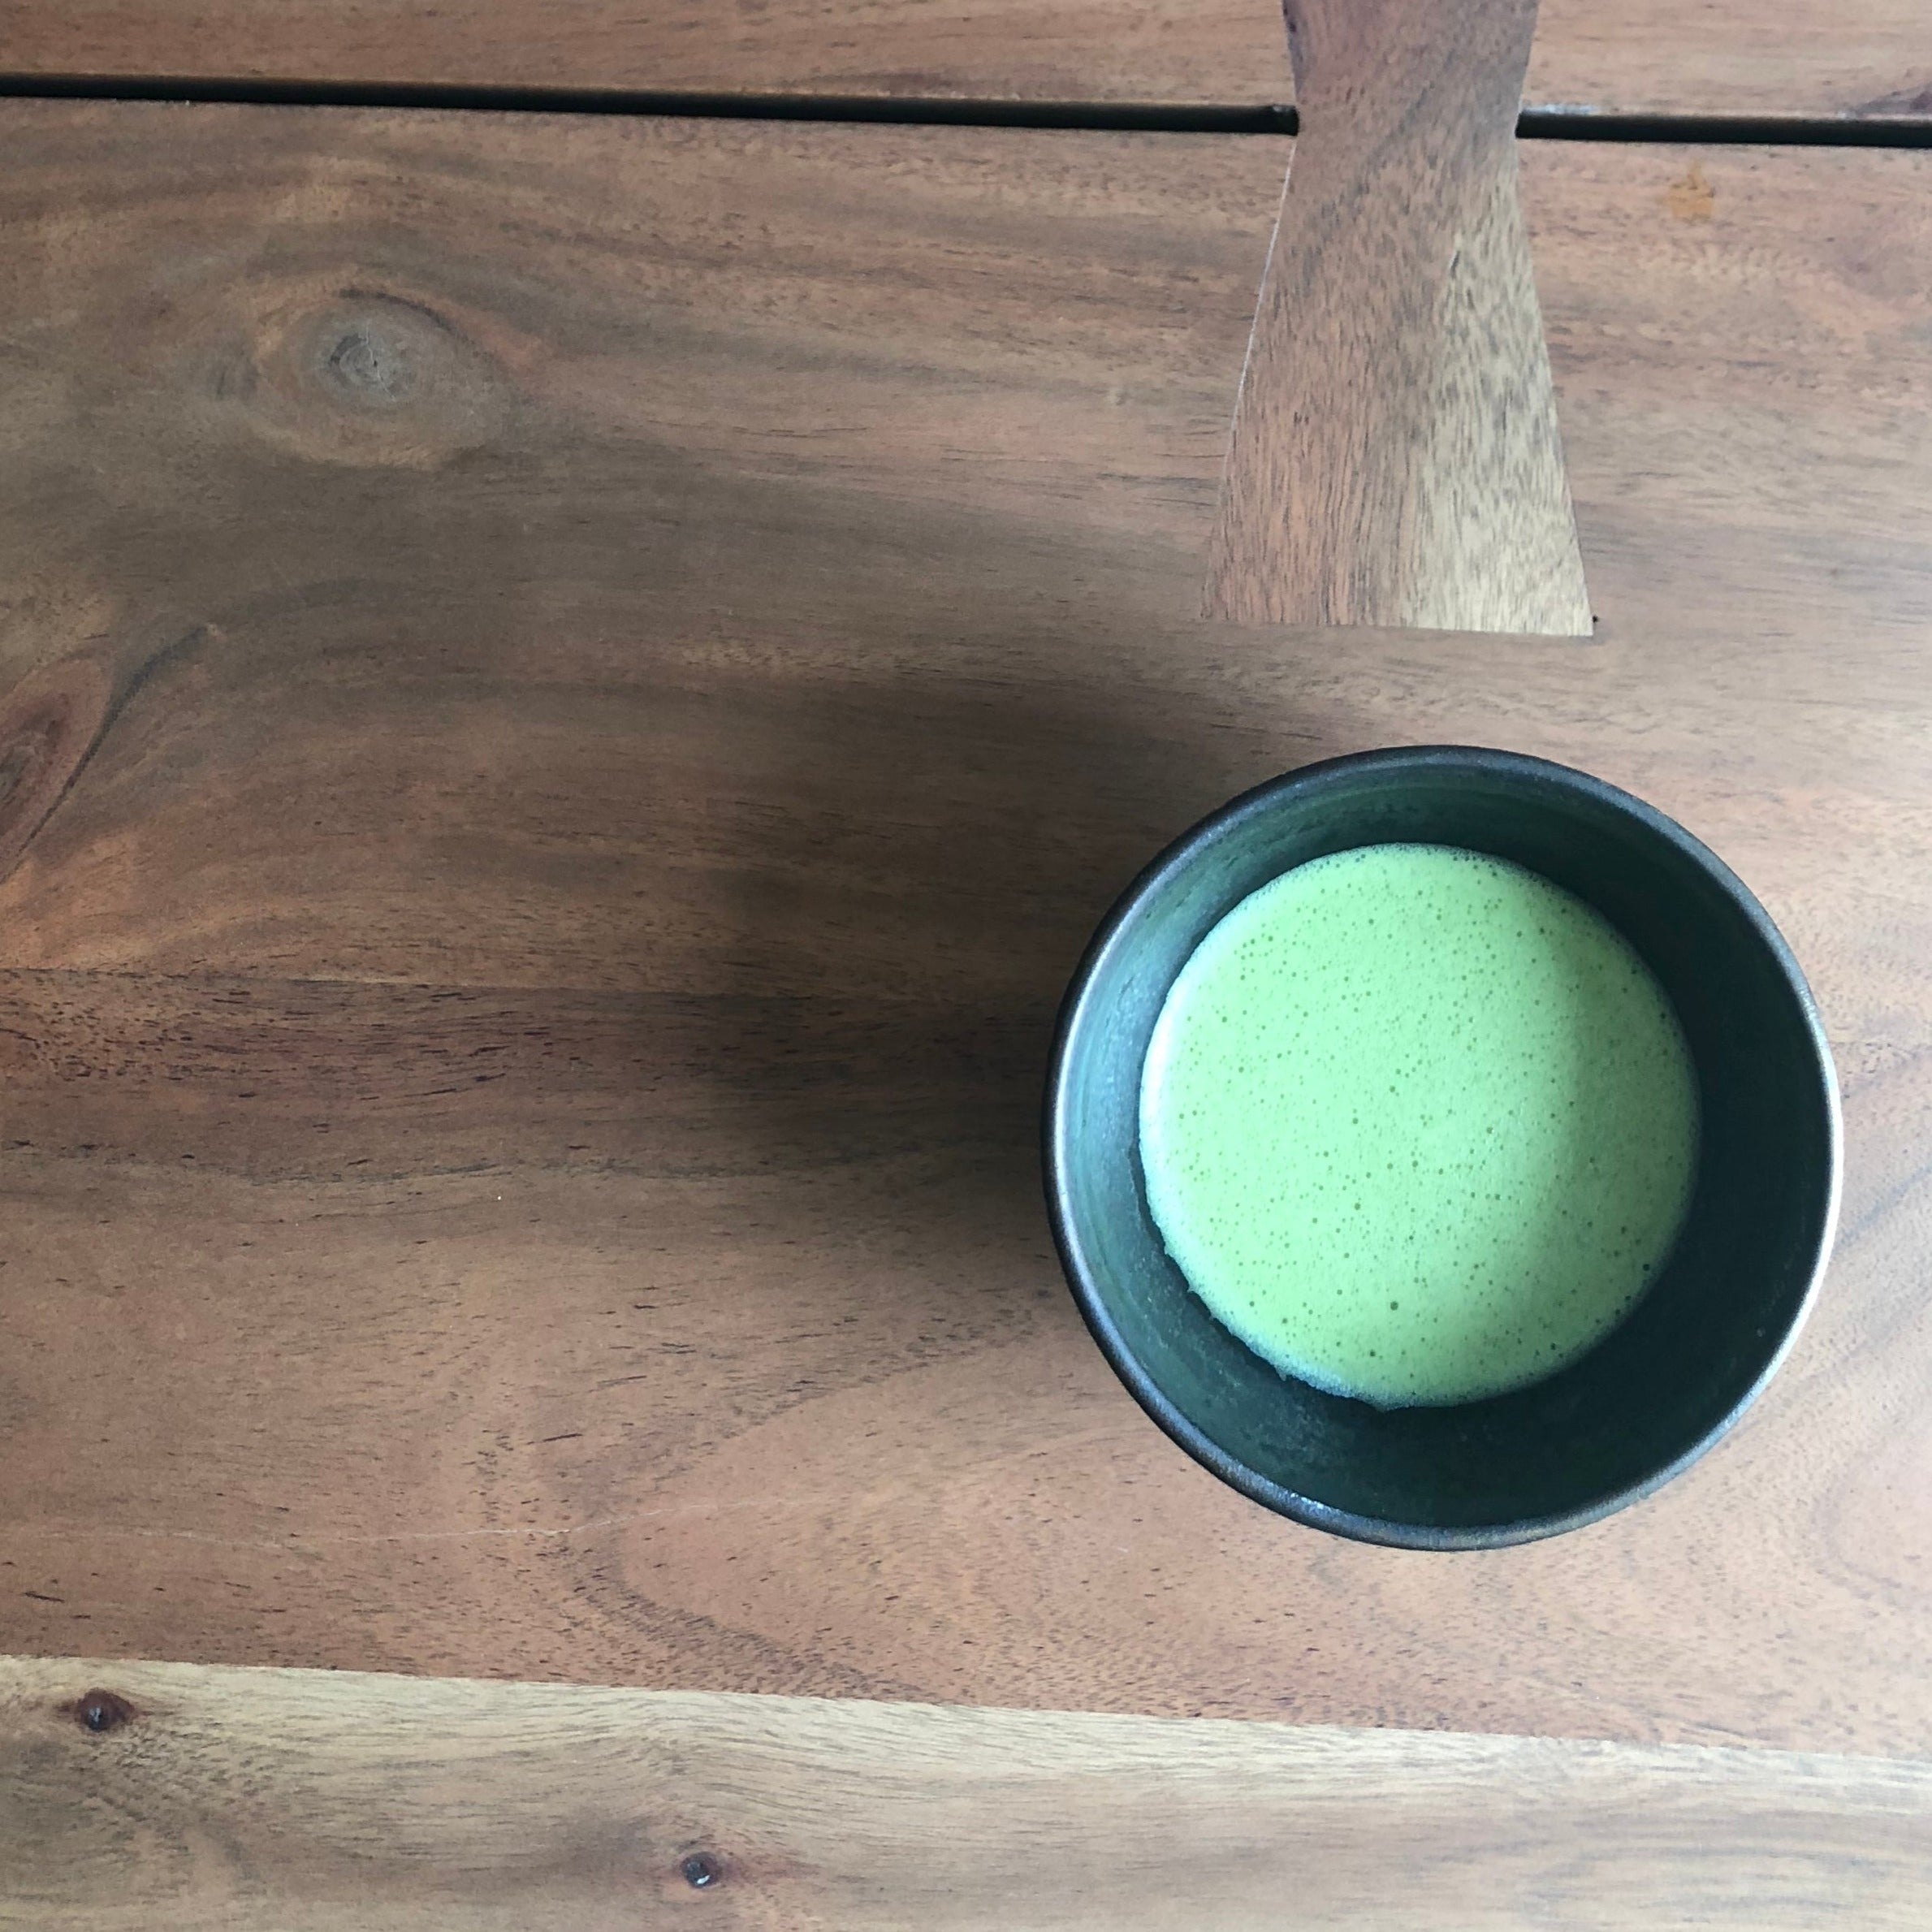 Ceremonial Matcha - On The Go Size Subscription